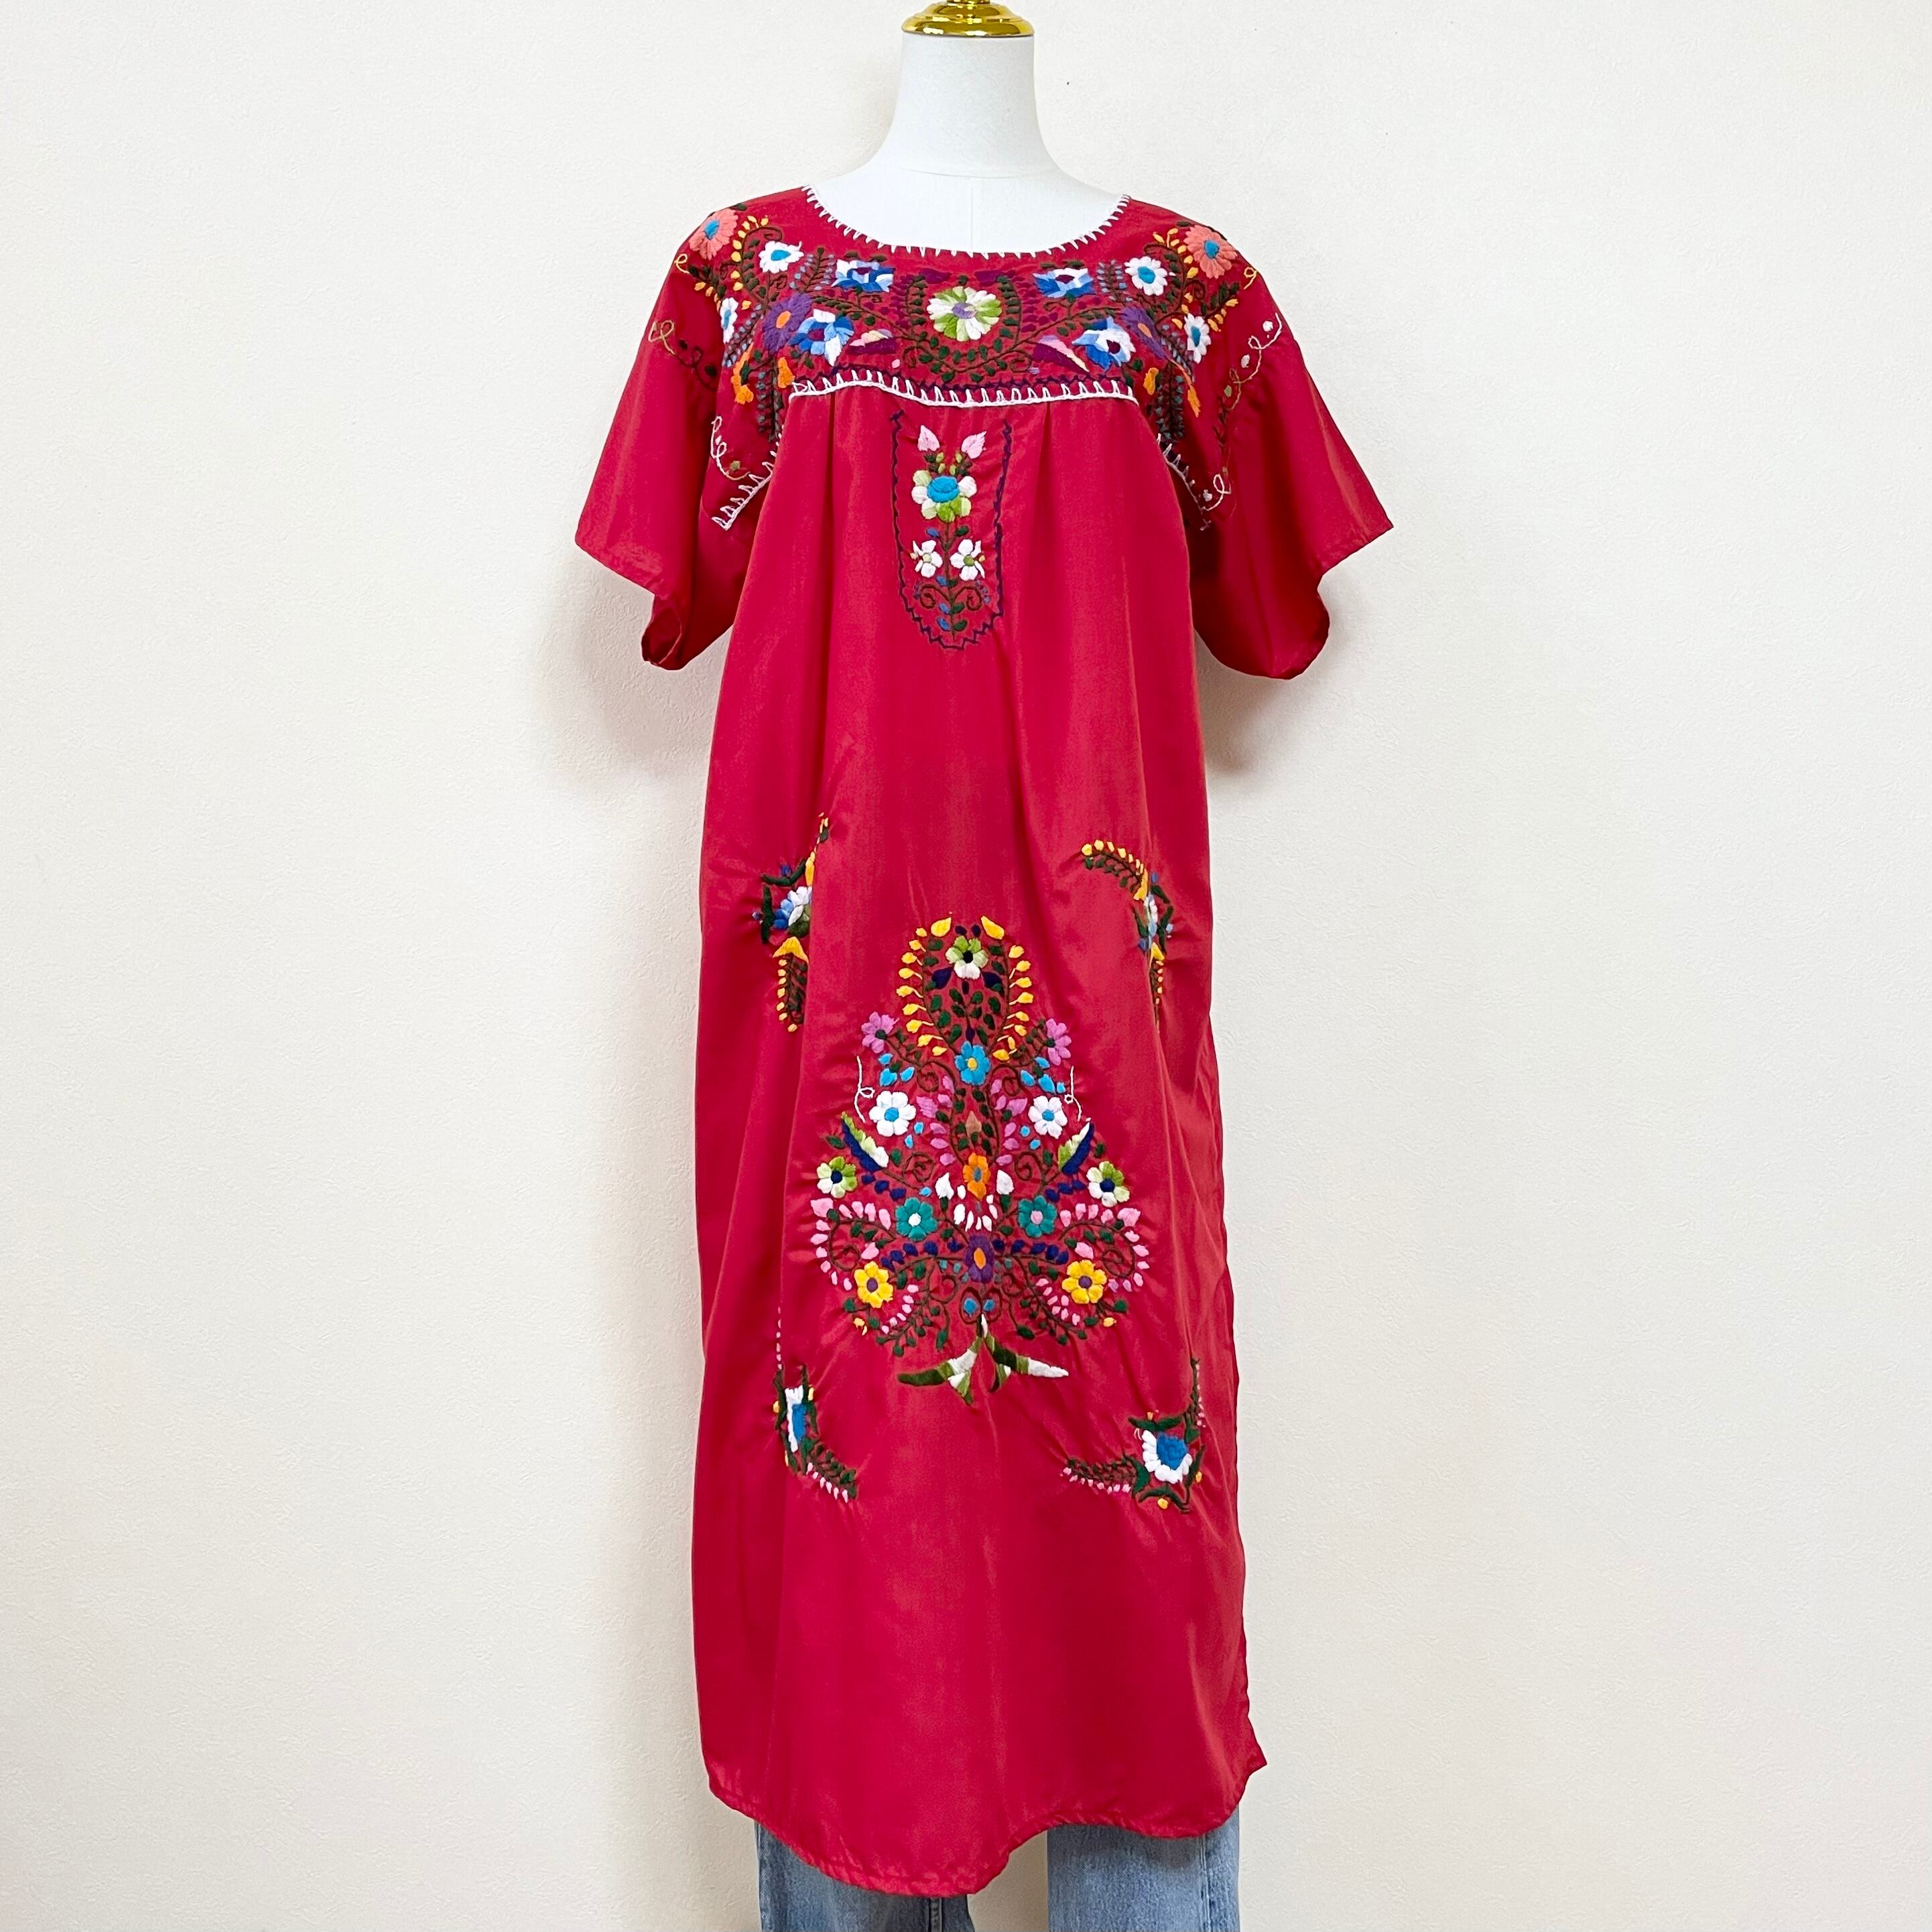 MEXICO 70s Embroidery Tunic Dress H26